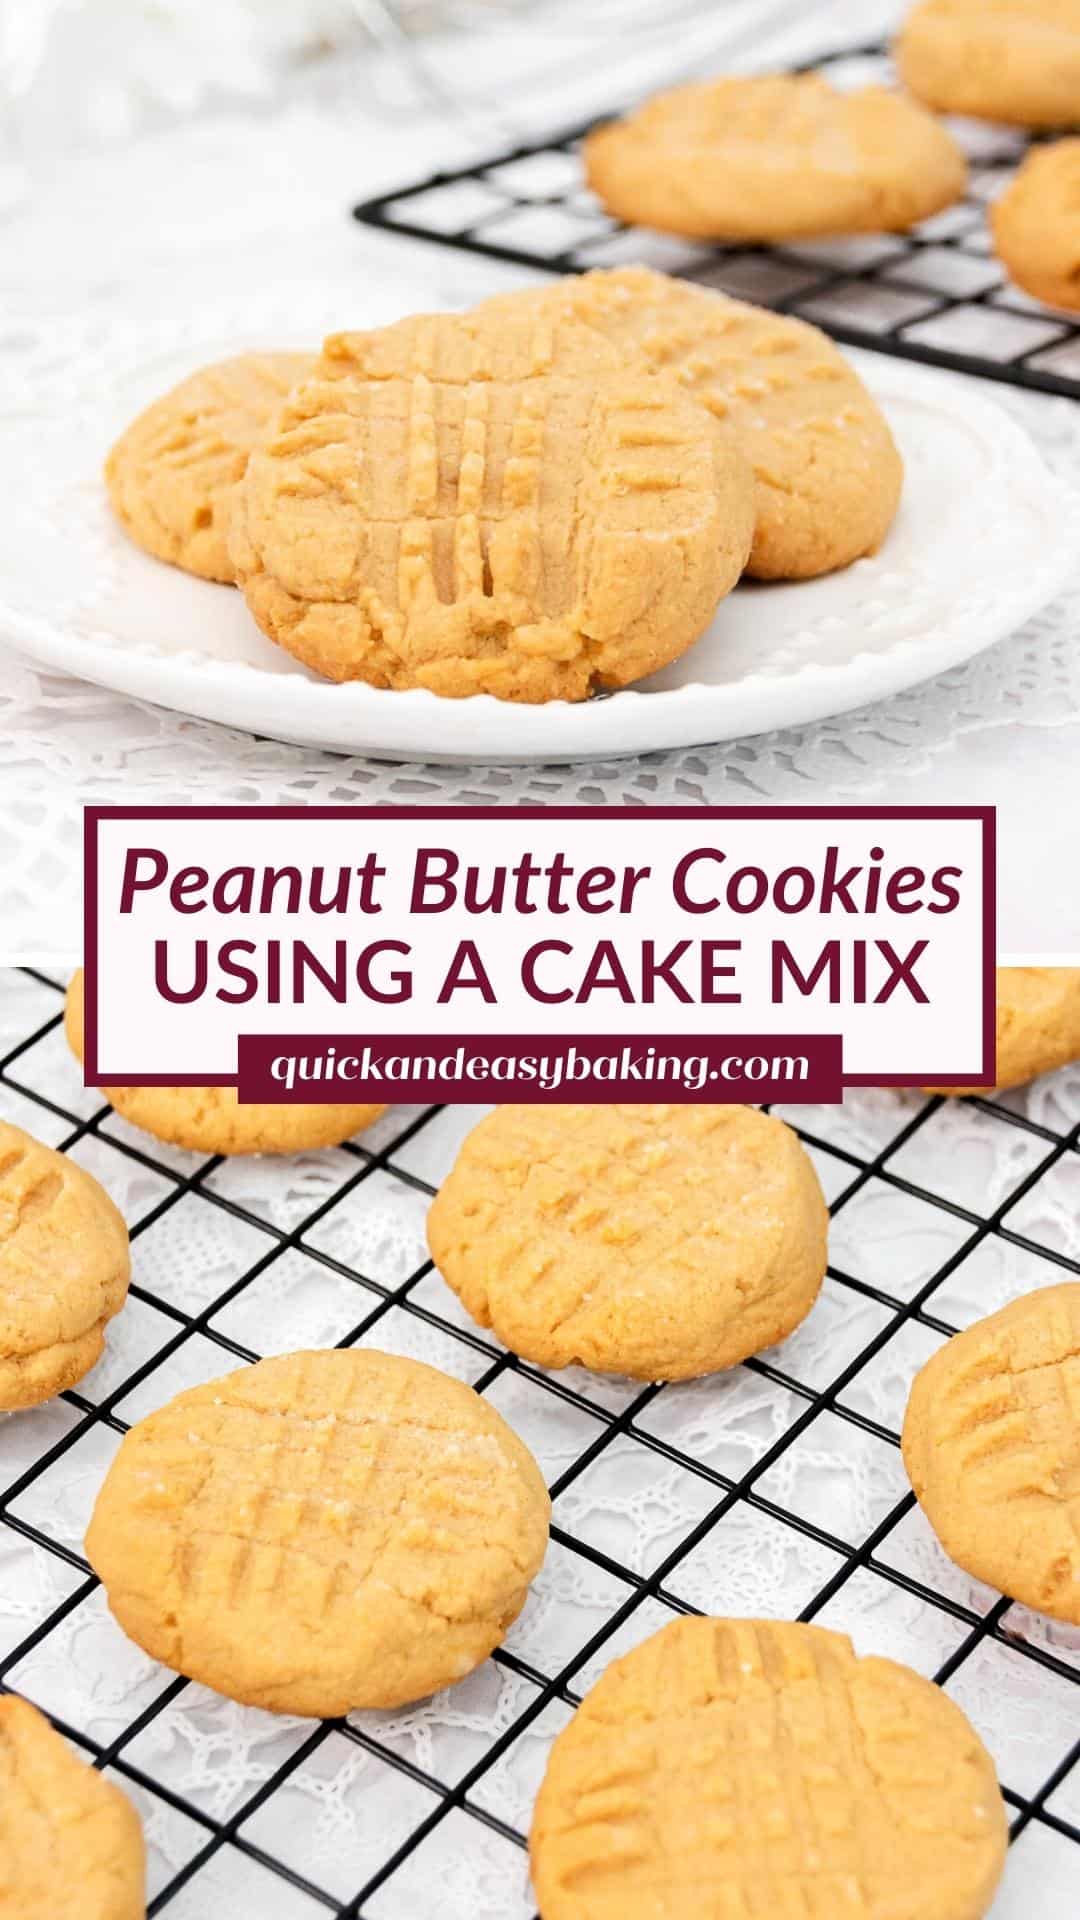 Collage of peanut butter cookies on a plate and a rack with text.